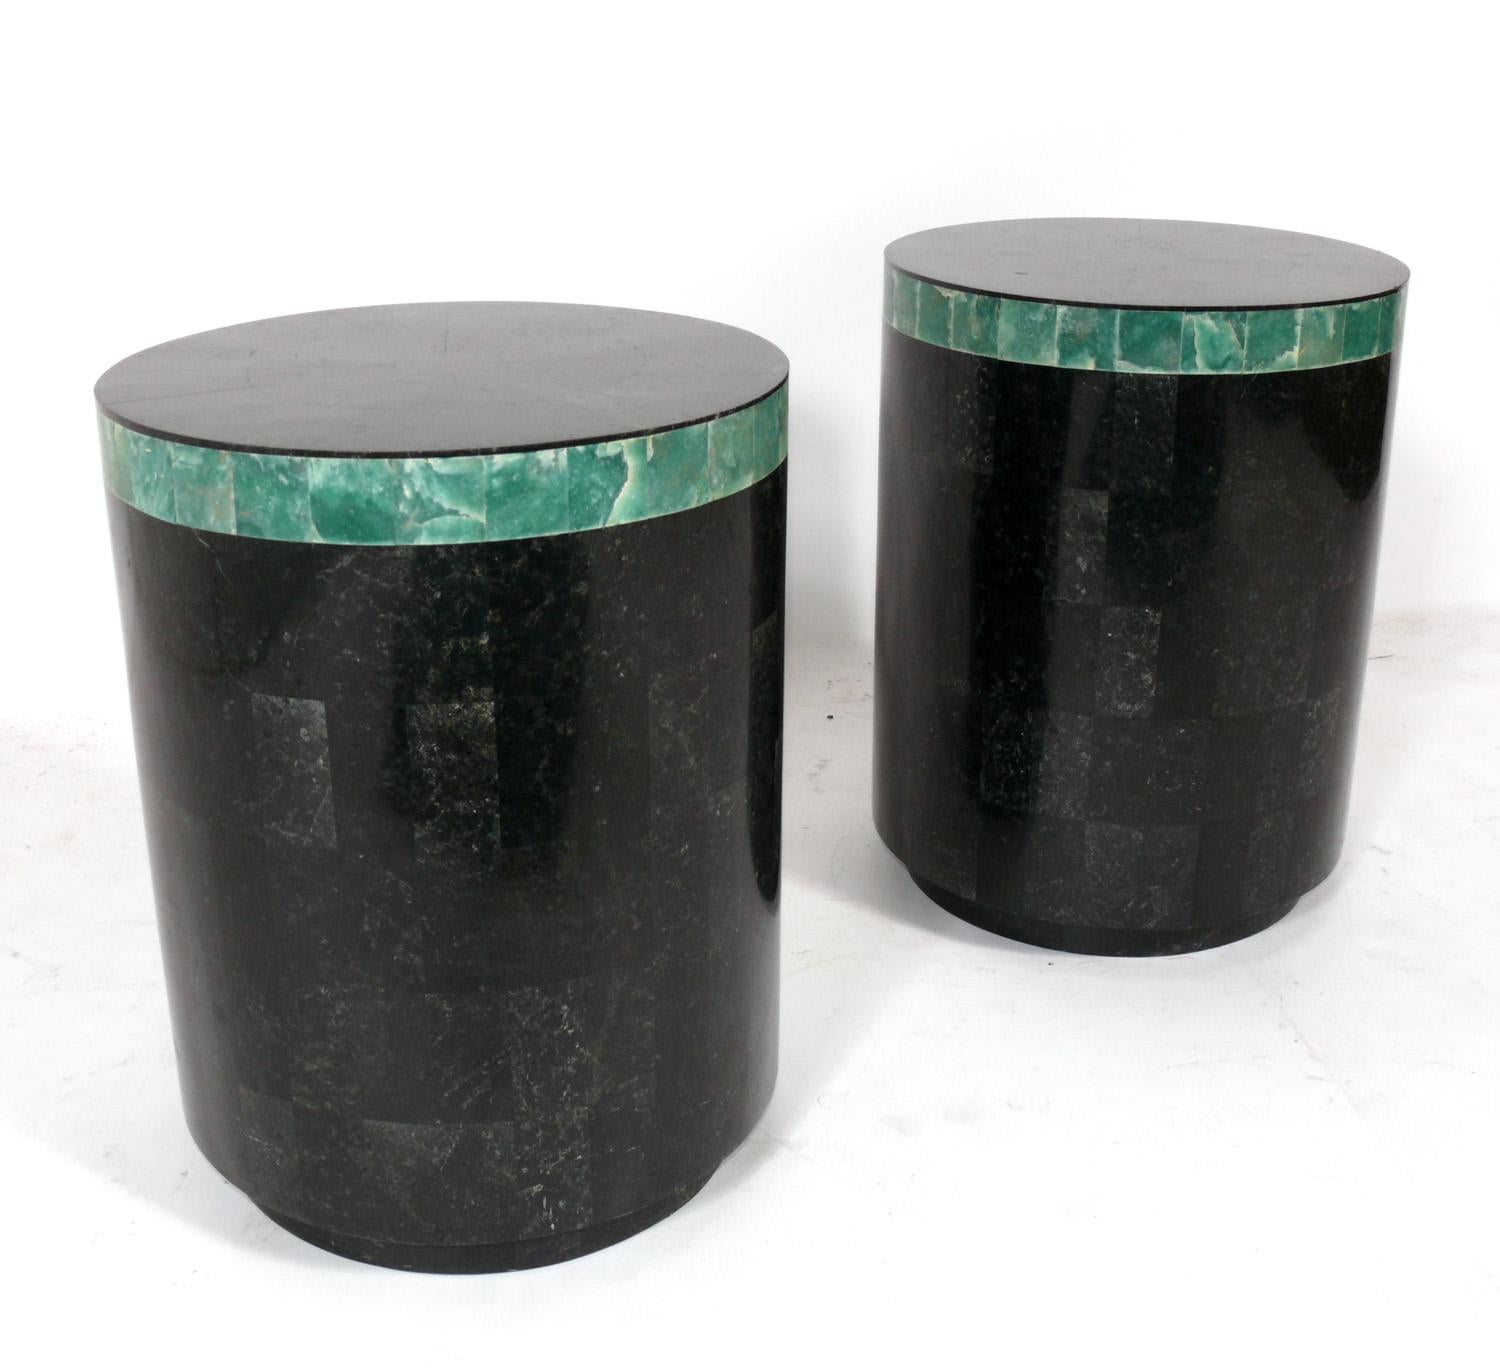 Pair of Tessellated Stone End Tables, in the manner of Karl Springer, American, circa 1980s. They are a versatile size and can be used as end or side tables, or as night stands.